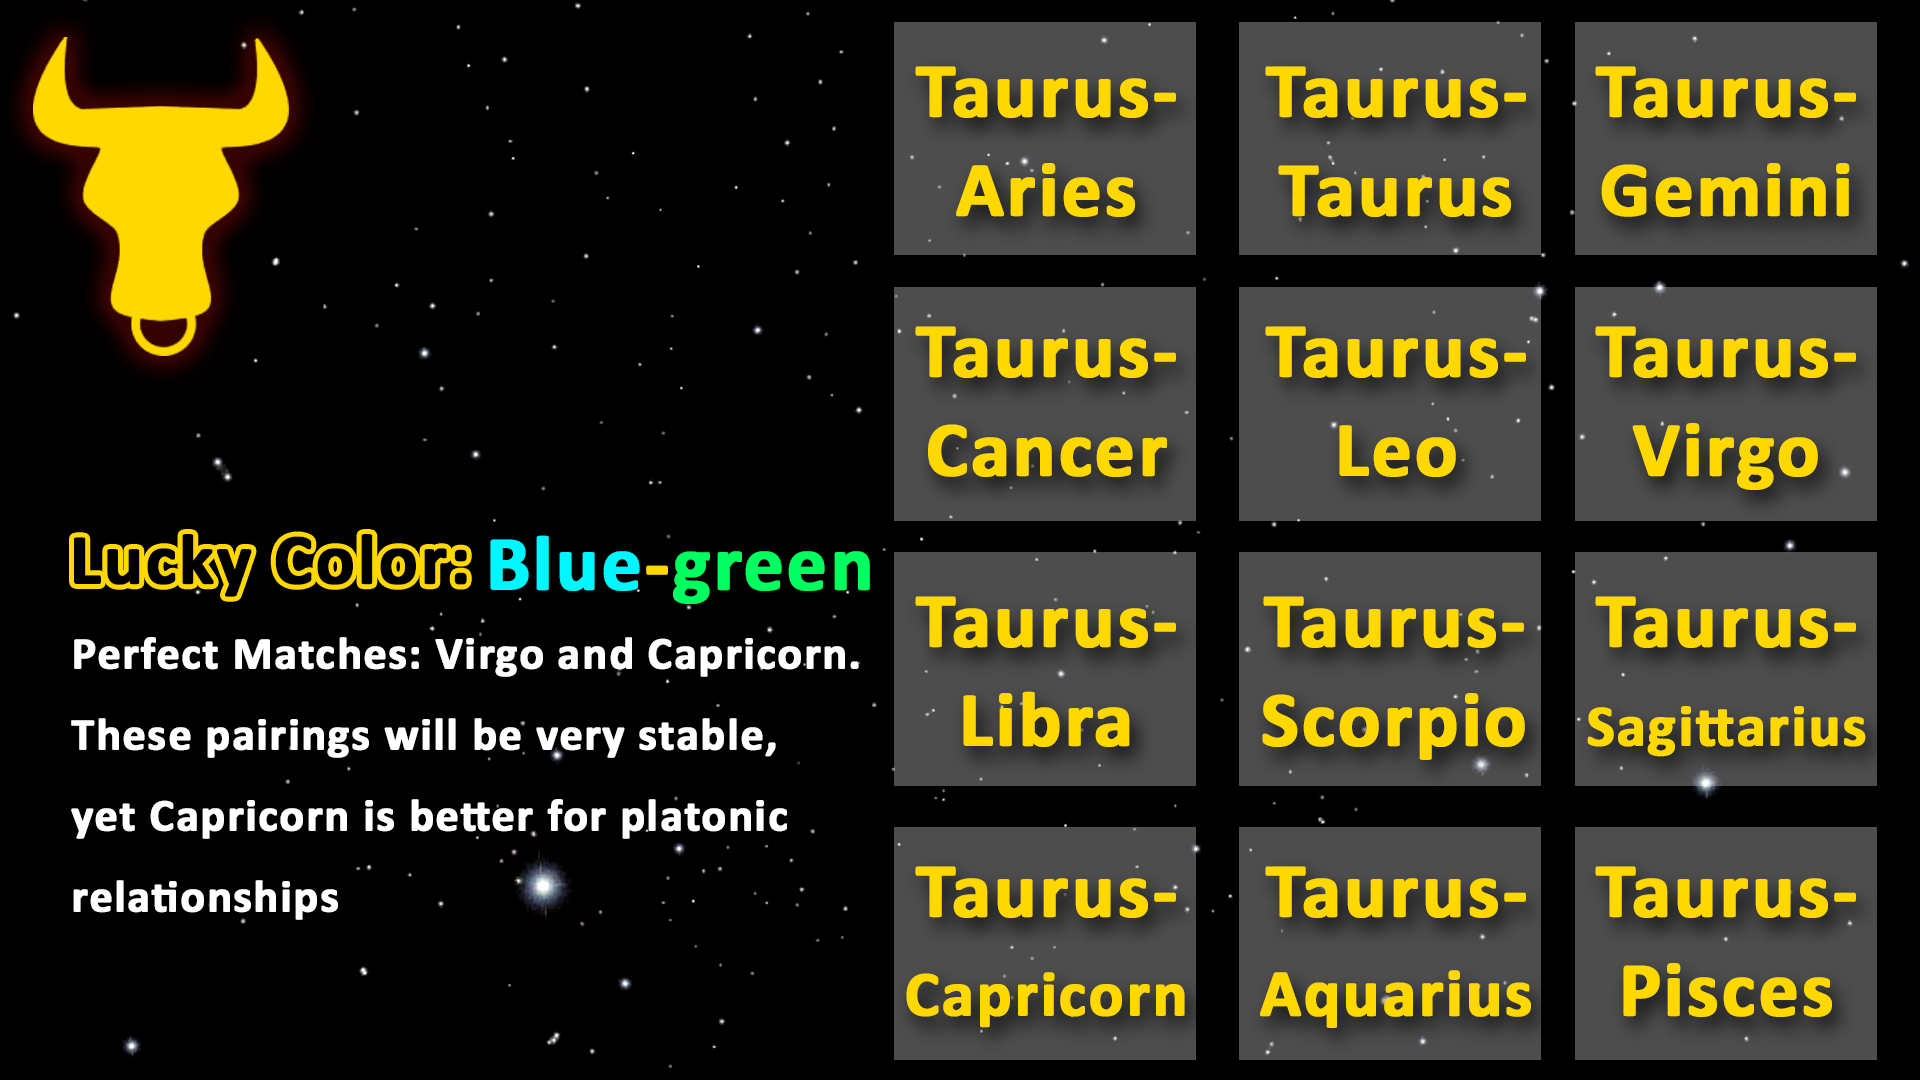  Choose-your-love-according-to-your-Zodiac-Signs-taurus